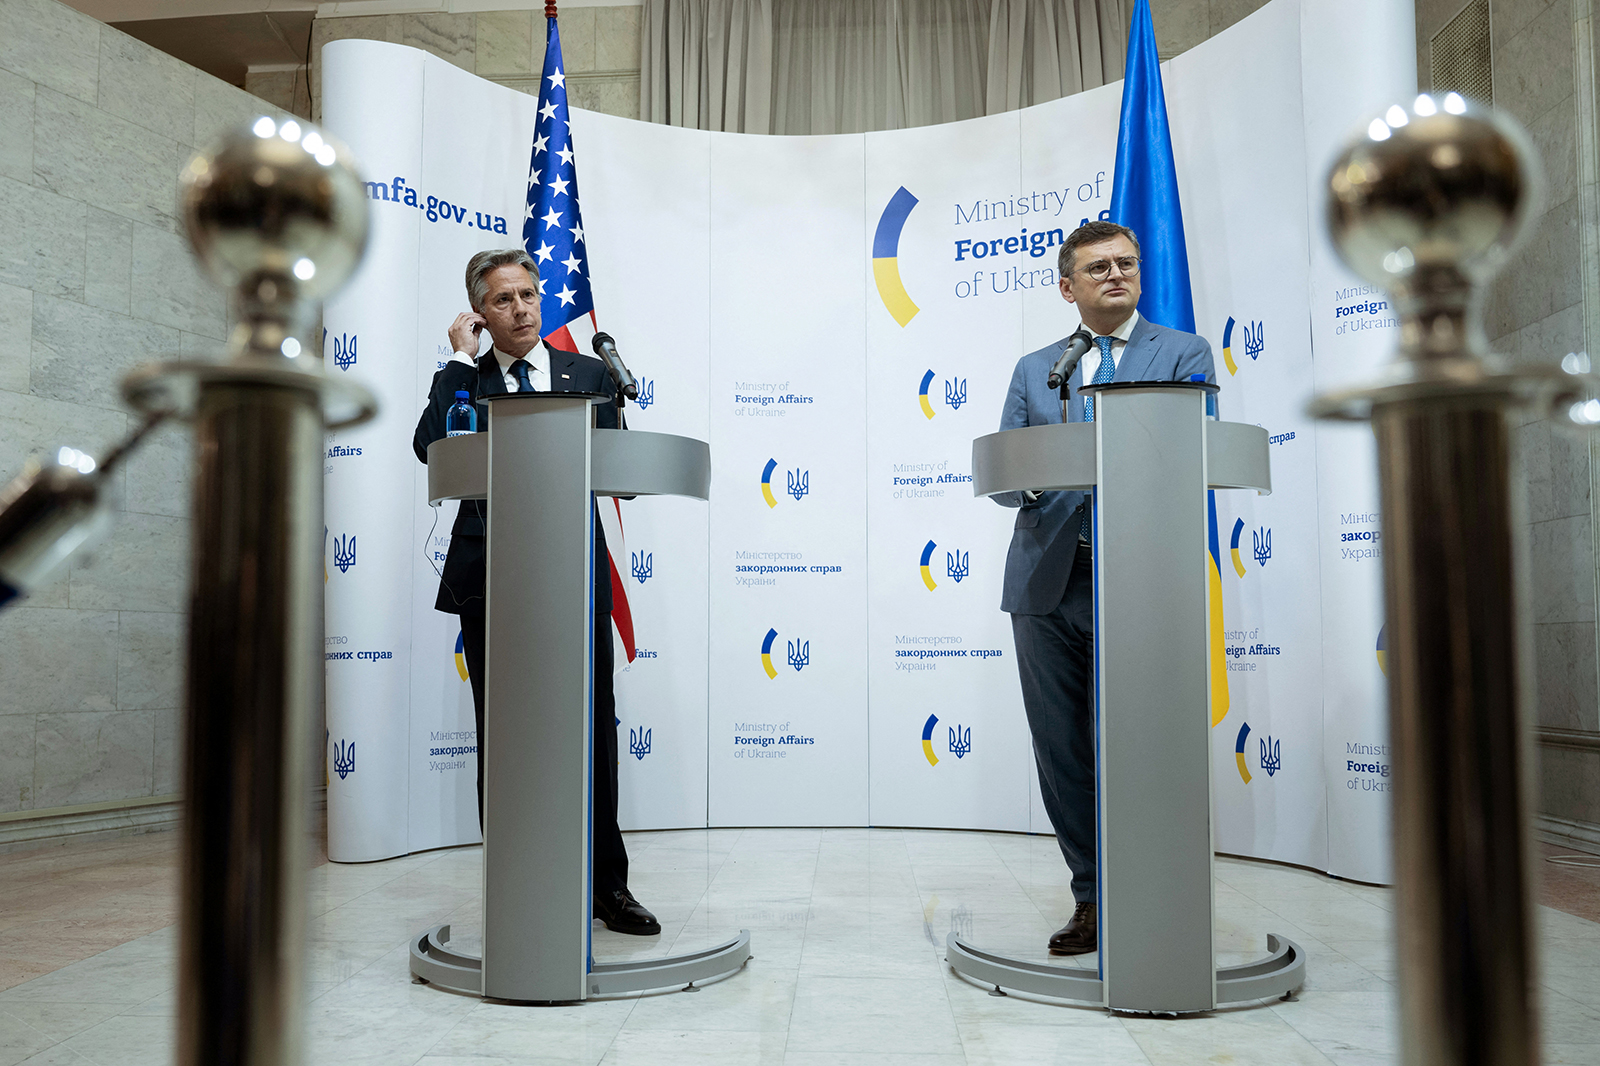 Antony Blinken attends a joint press conference at the Ministry of Foreign Affairs in Kyiv, Ukraine on September 6.